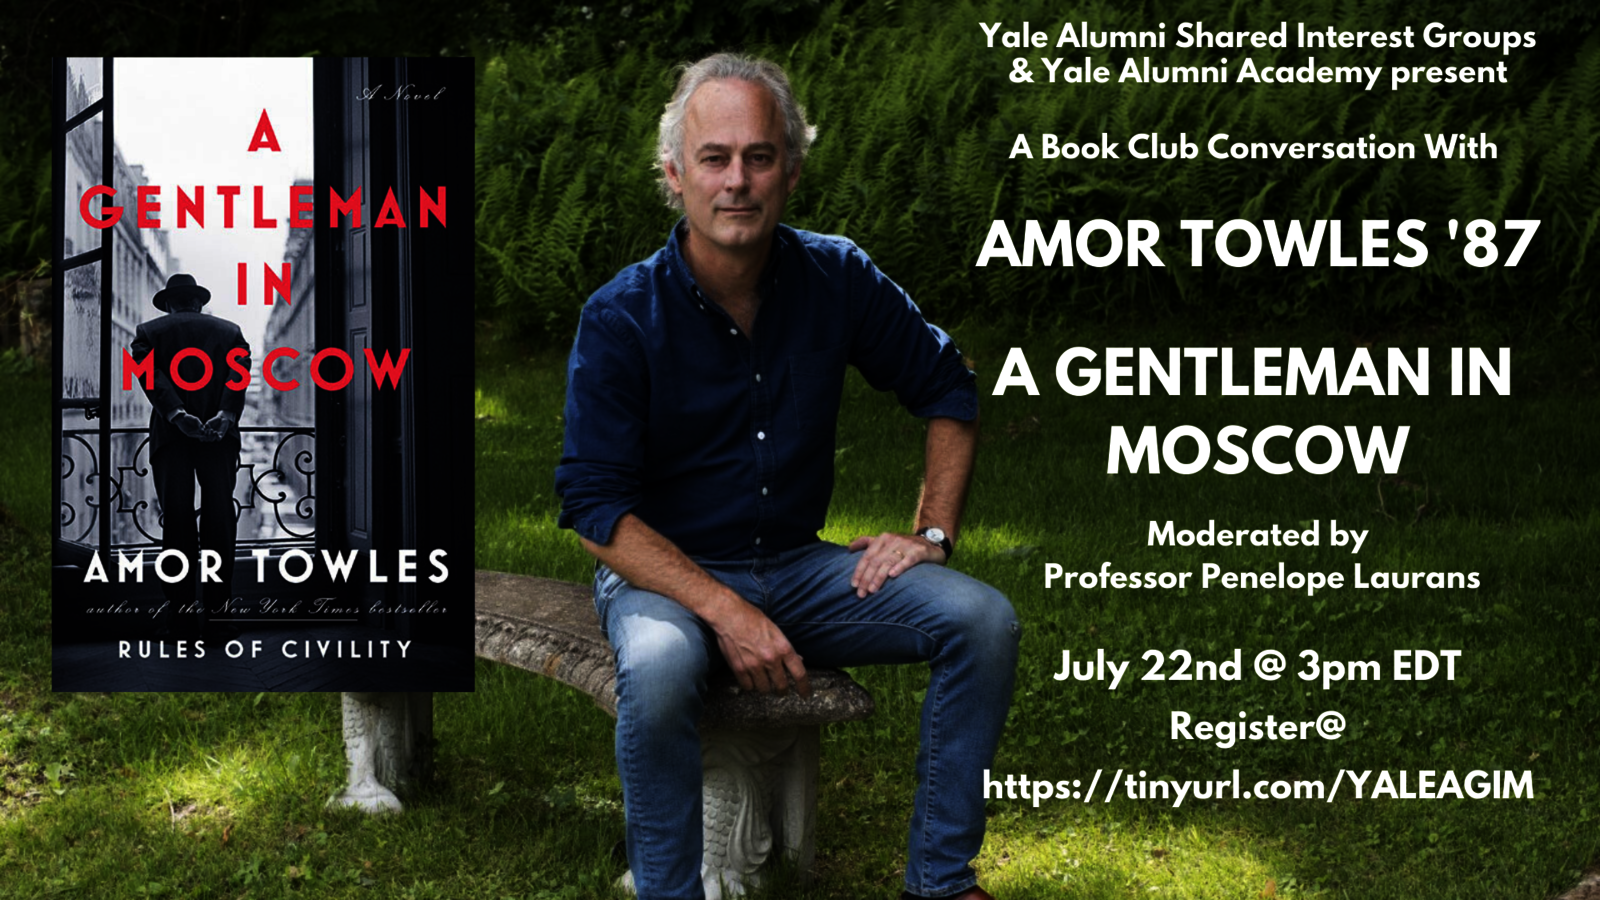 Graphic for webinar, "A Gentleman in Moscow: A Book Club Conversation with Amor Towles ’87 & Prof. Penelope Laurans"